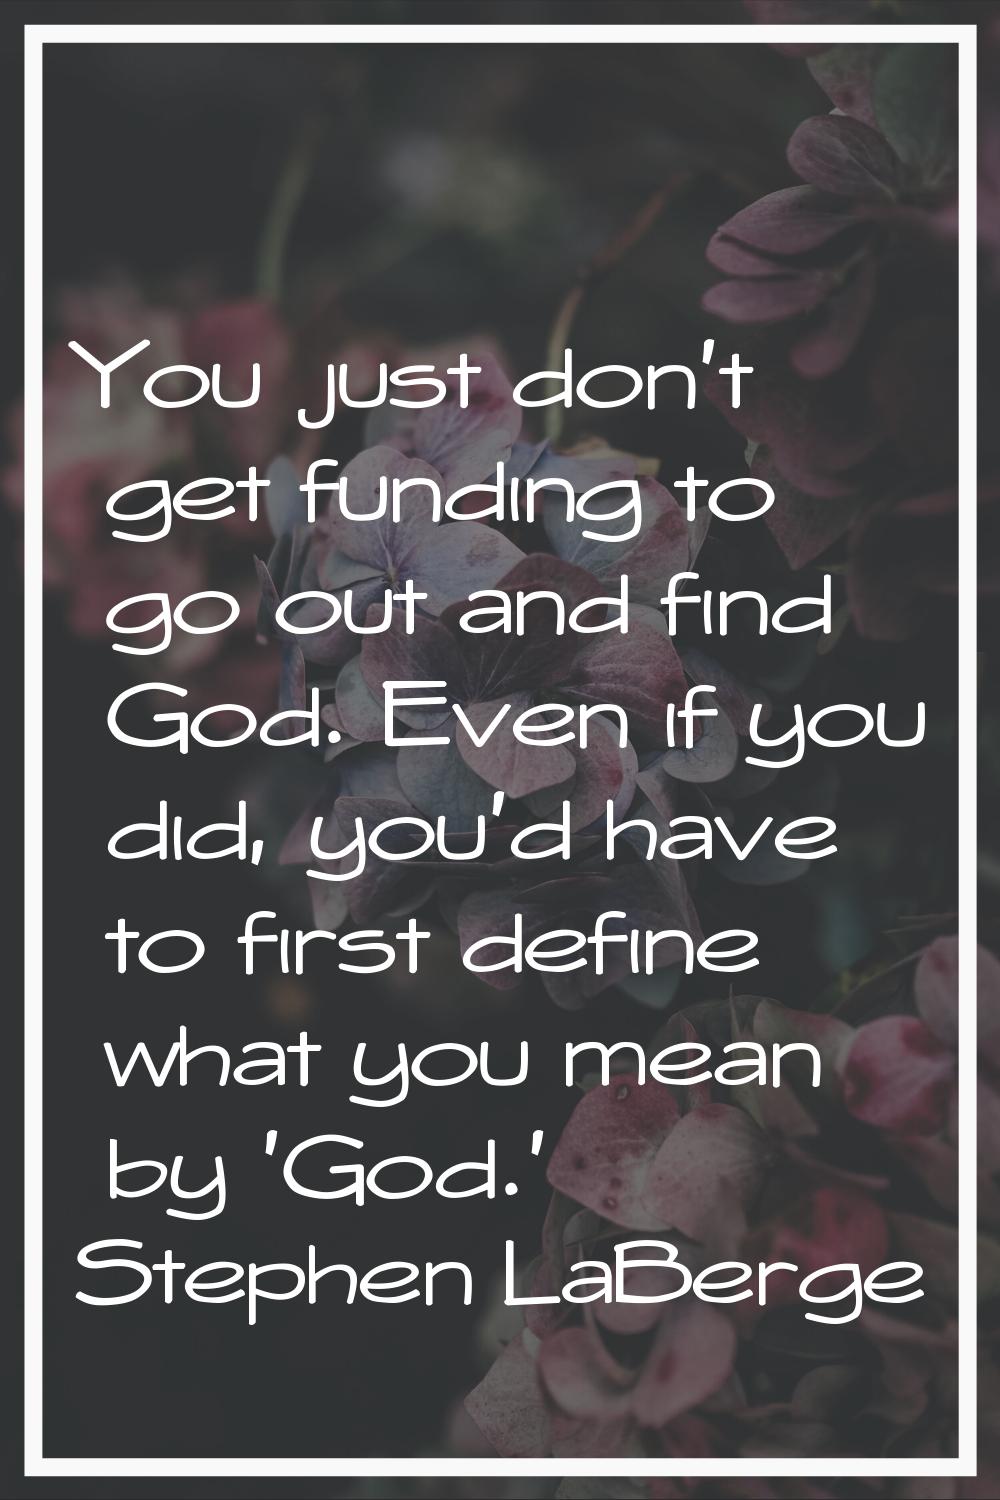 You just don't get funding to go out and find God. Even if you did, you'd have to first define what